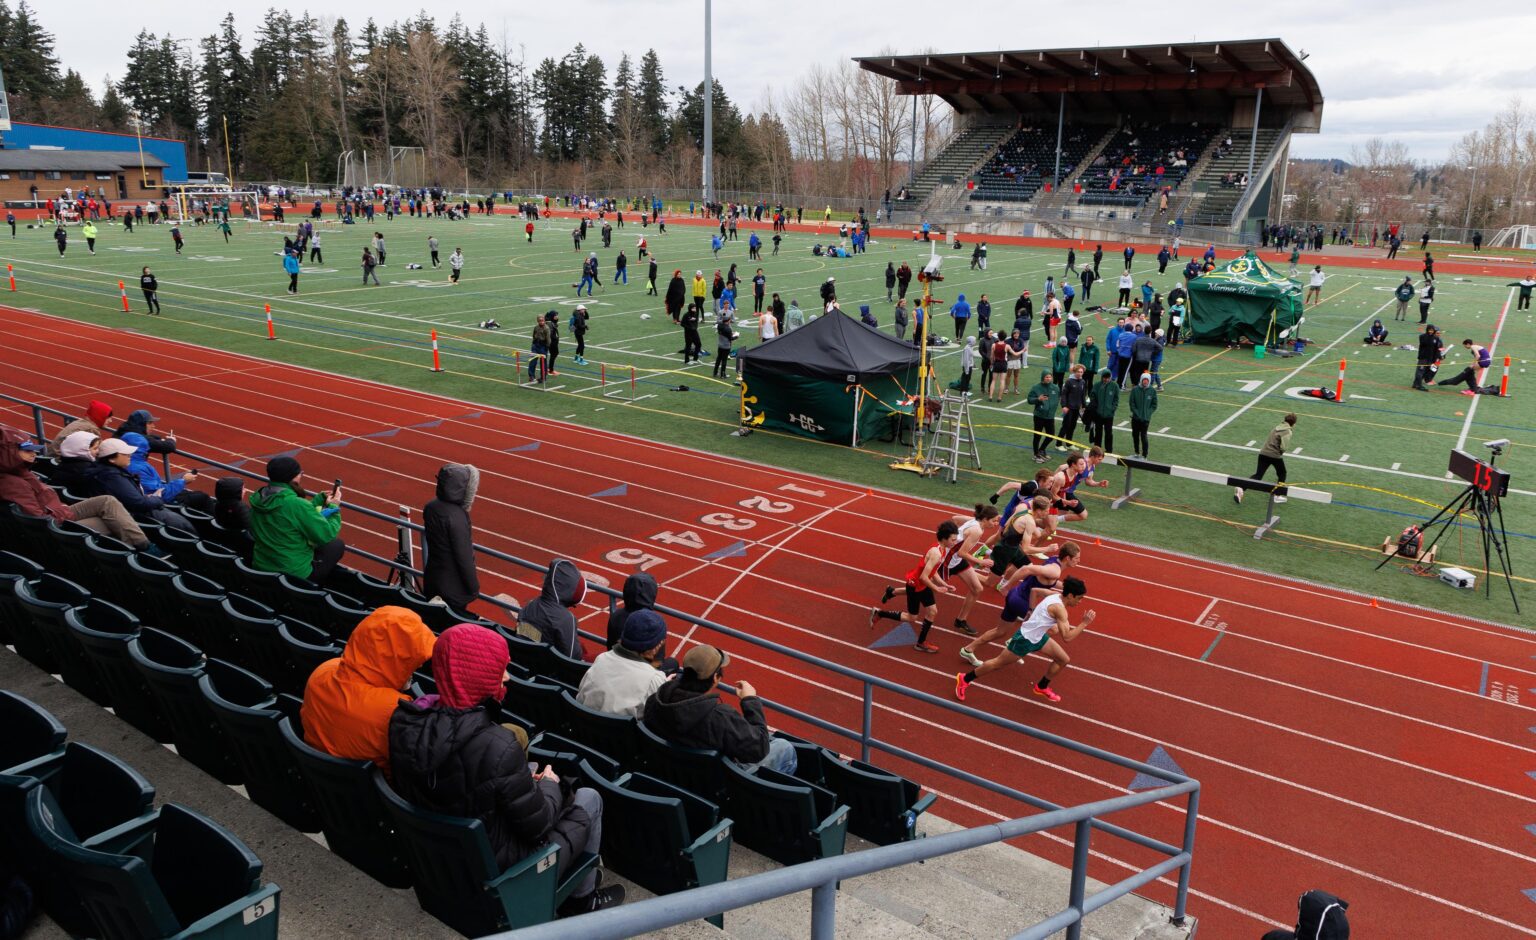 Runners take off in the boys 800-meter run as spectators on the bleacher seats watch while other spectators on the grass walk around in preparation.